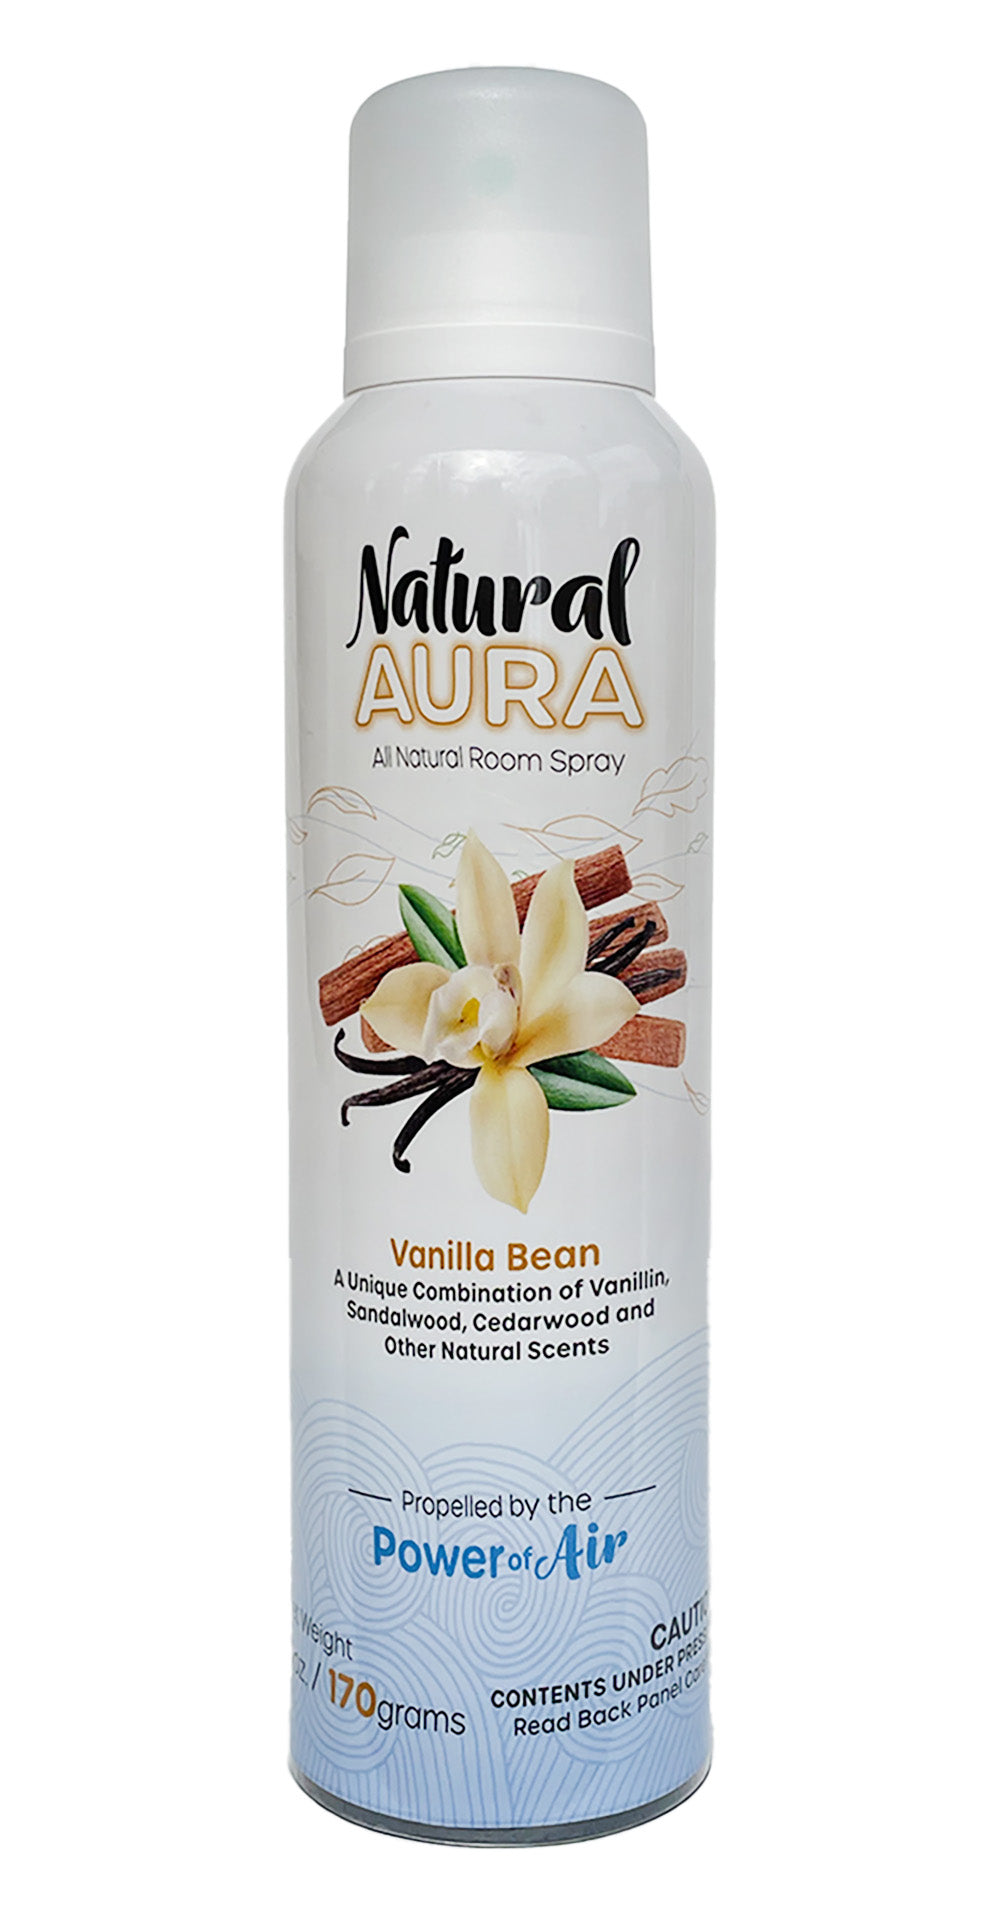 Front label of the Natural Aura Vanilla Bean Room Spray on a white background.